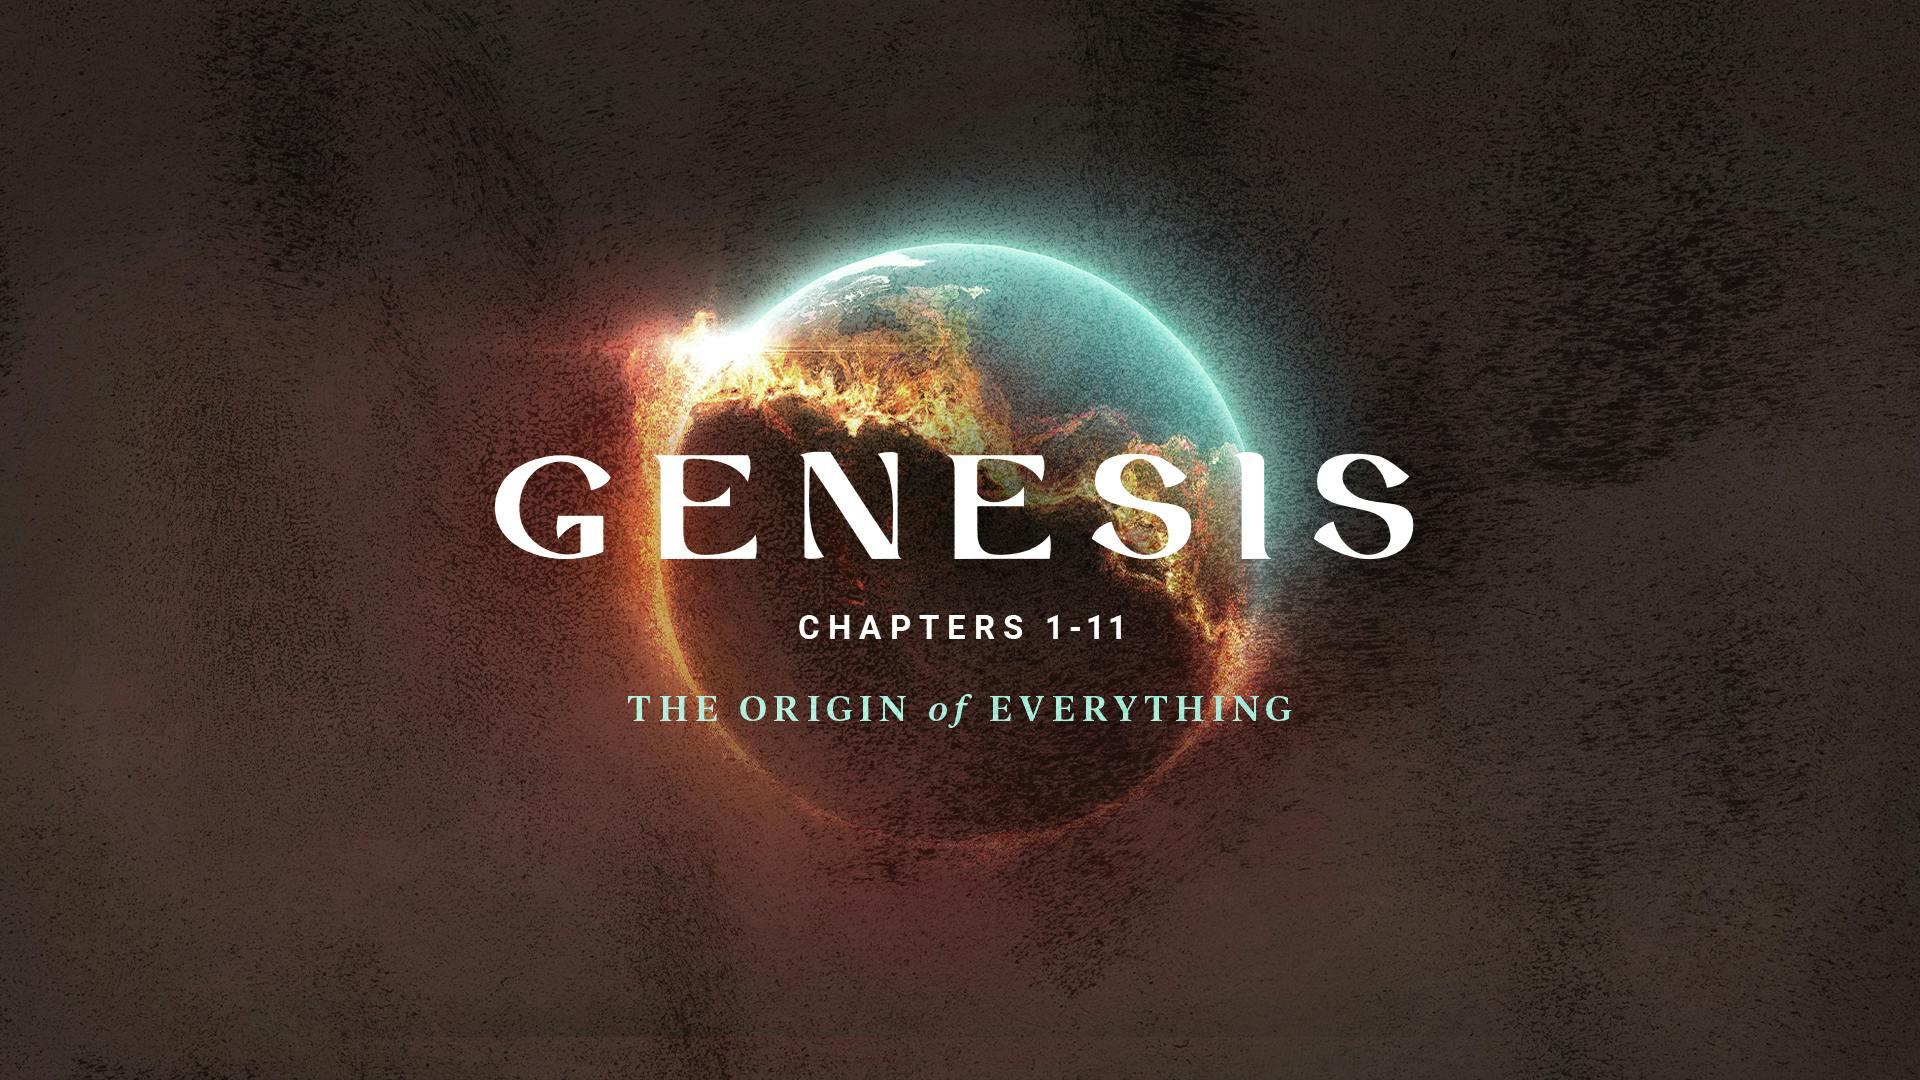 Genesis: The Origin of Everything - God cover for post